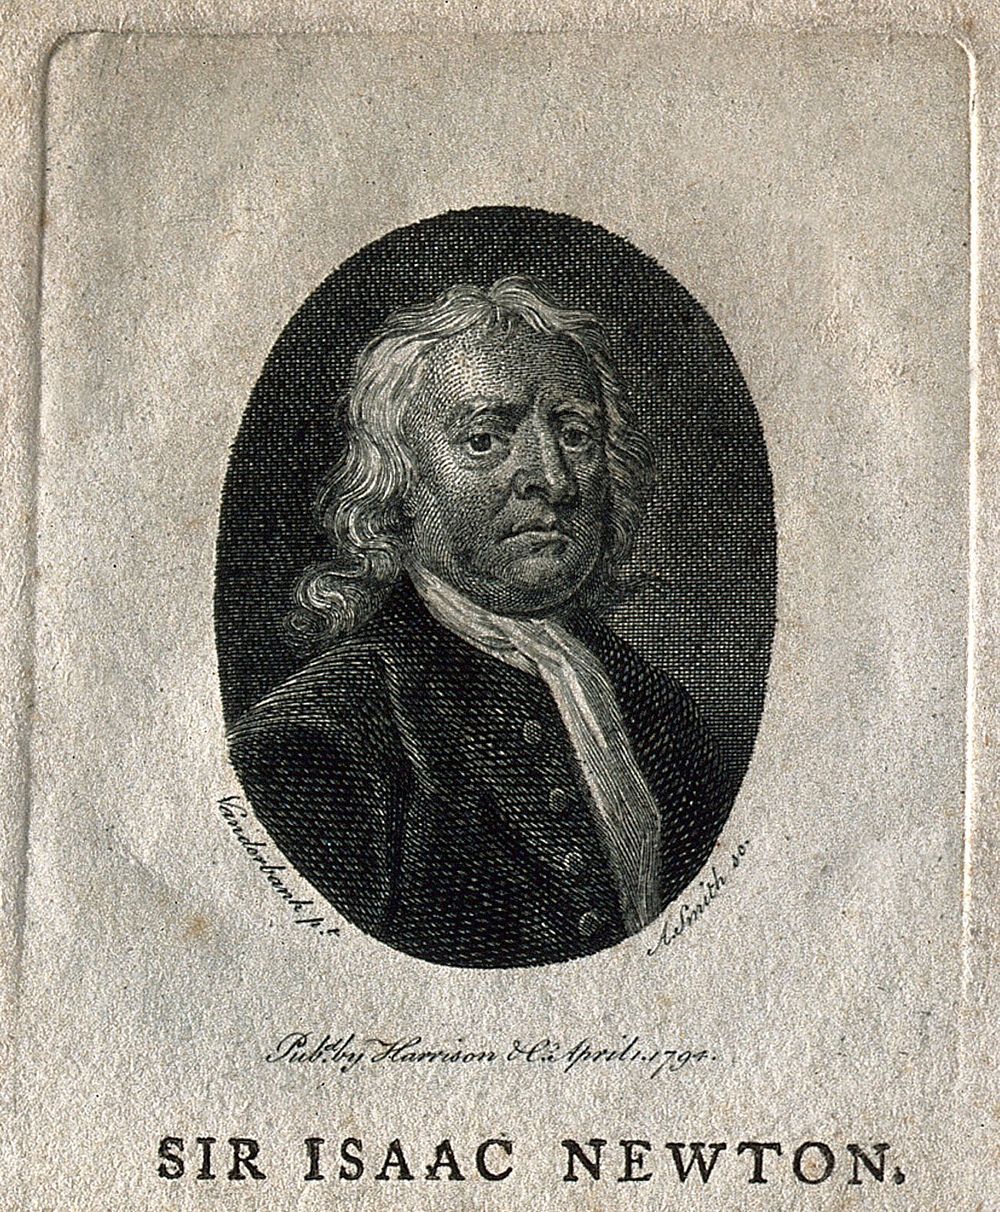 Sir Isaac Newton. Line engraving by A. Smith, 1794, after J. Vanderbank, 1725.